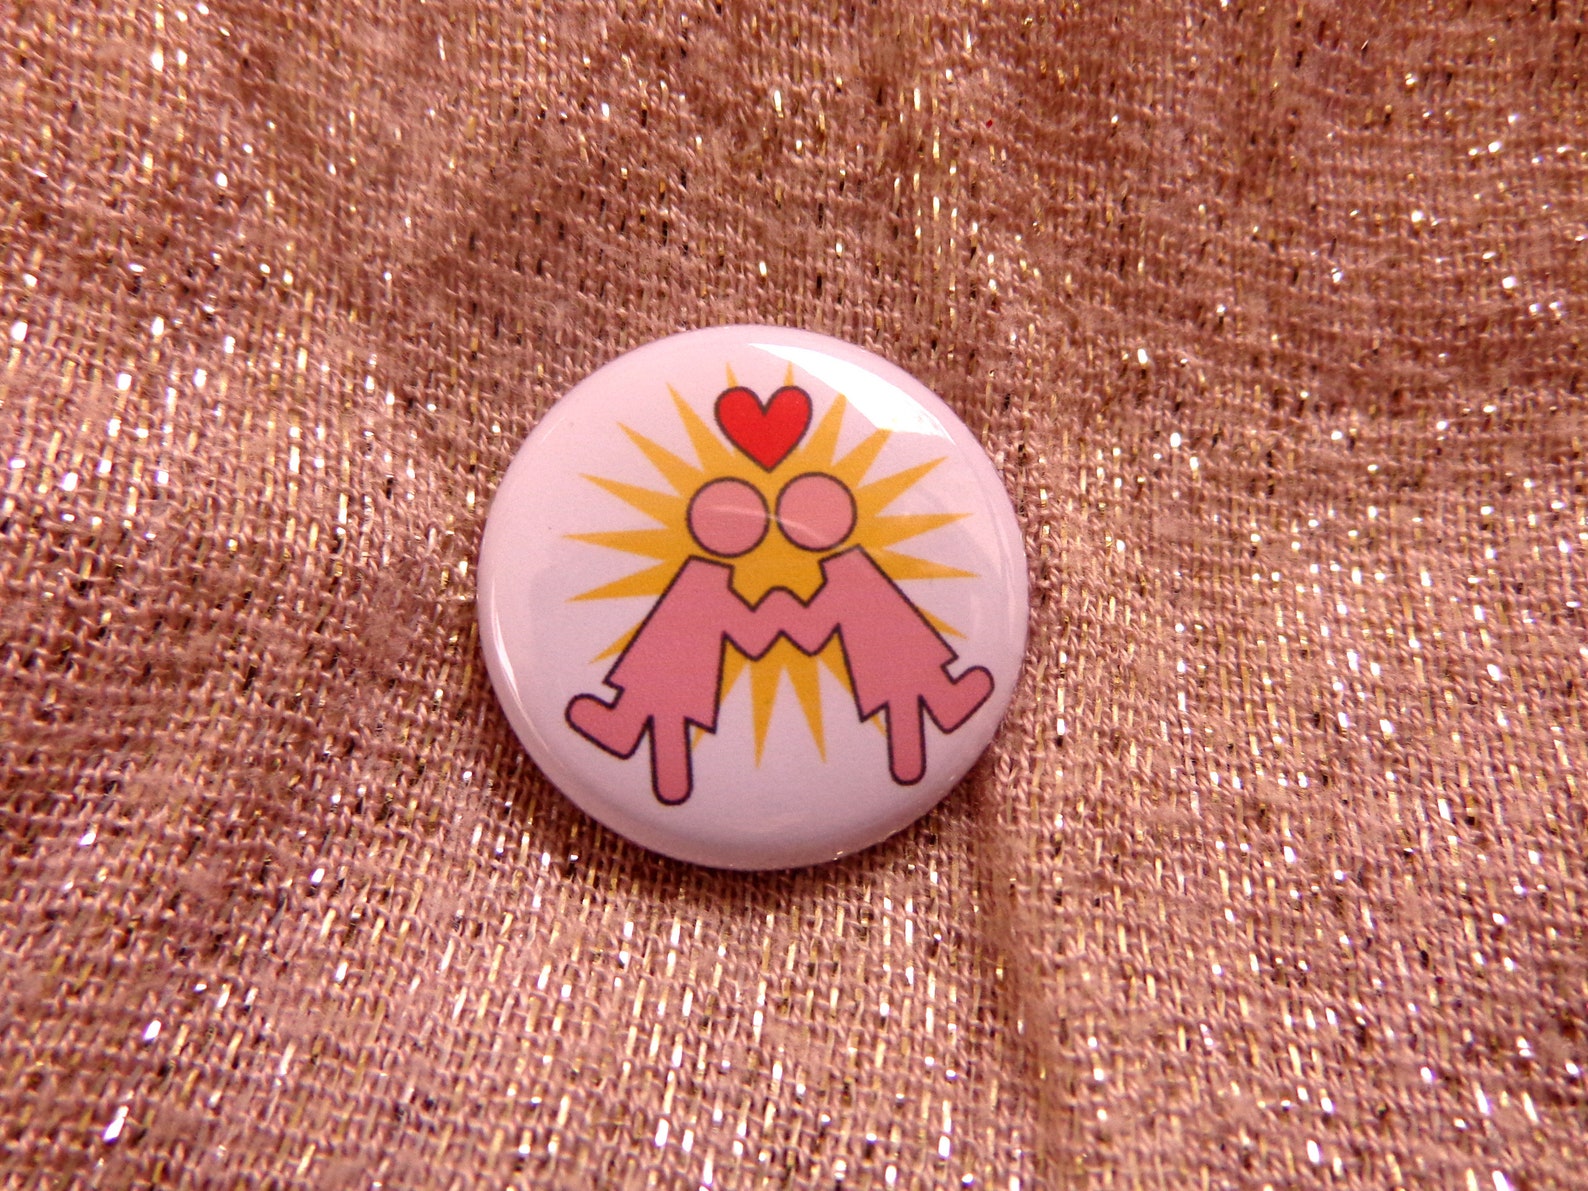 Lesbian Couple 1 Inch Pinback Button Pin Badge Lgbtq Queer Etsy